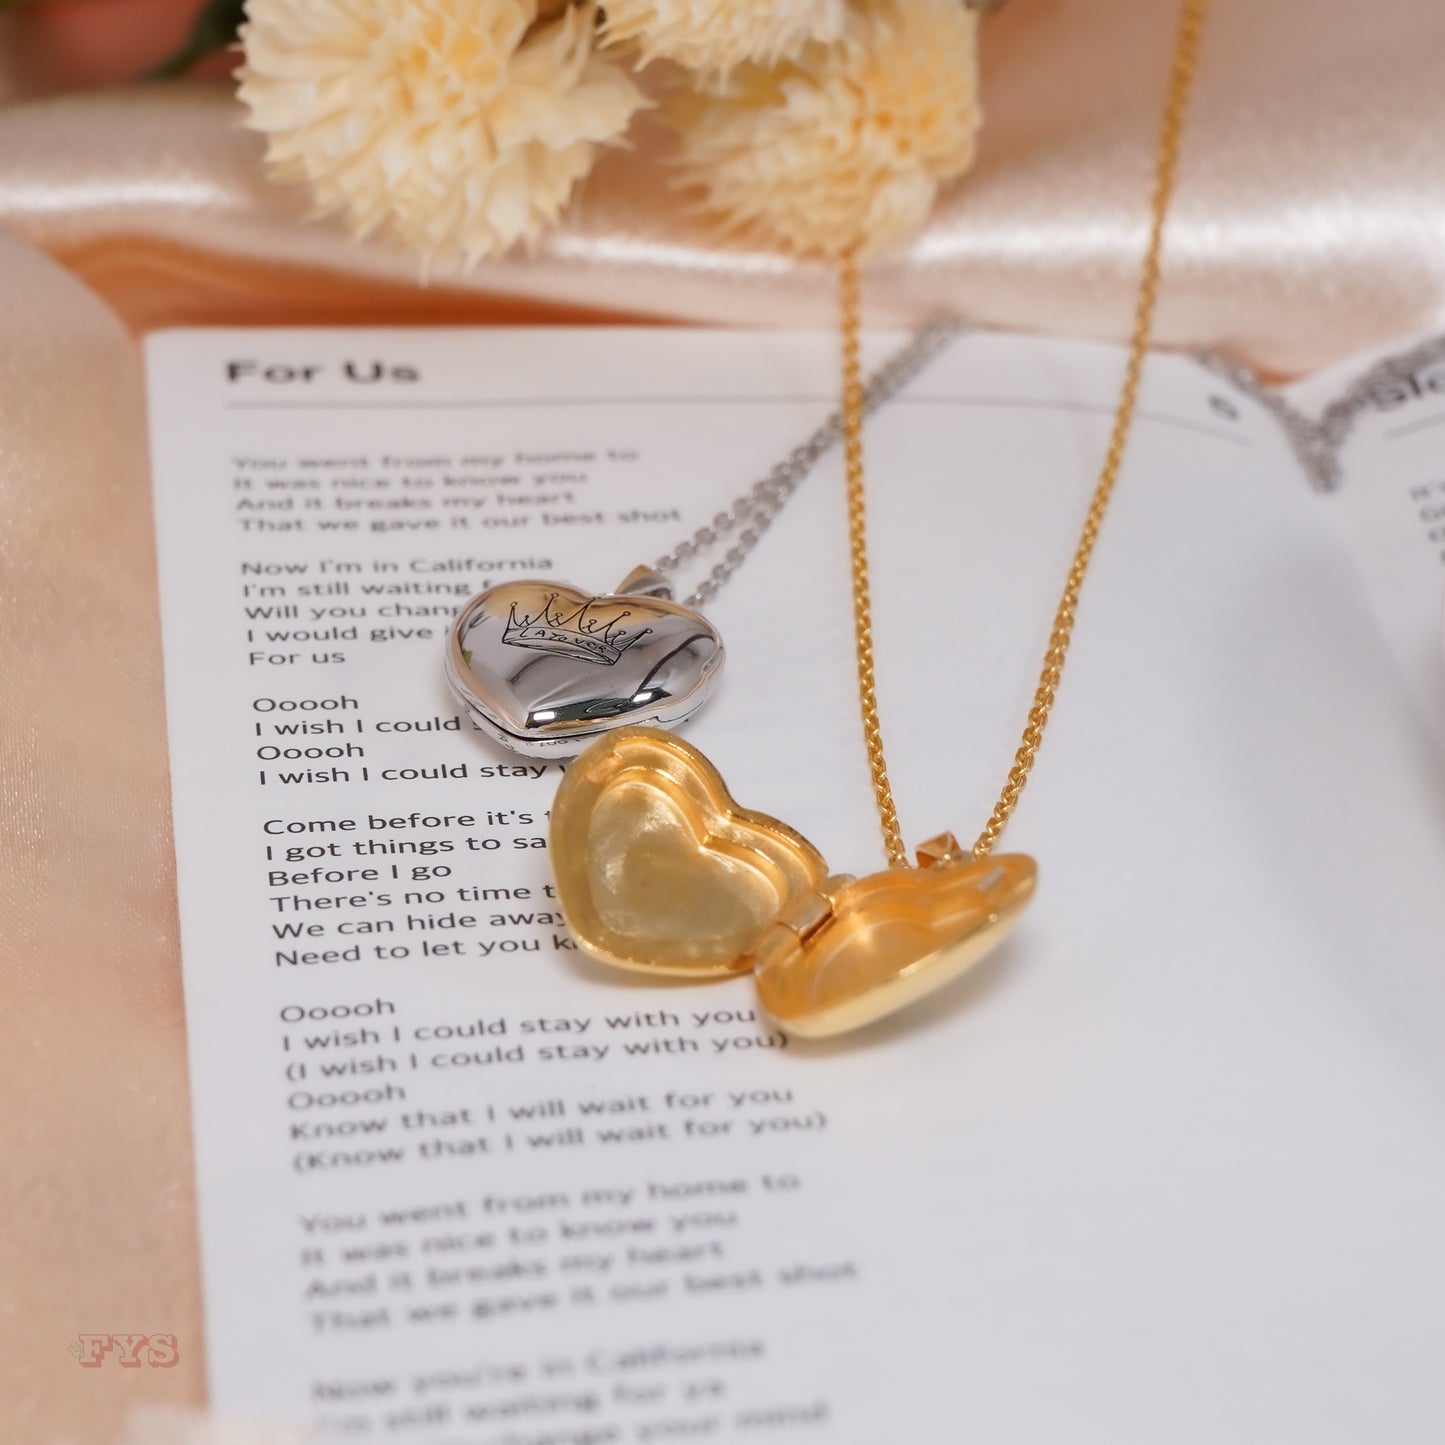 For Us Locket Necklace